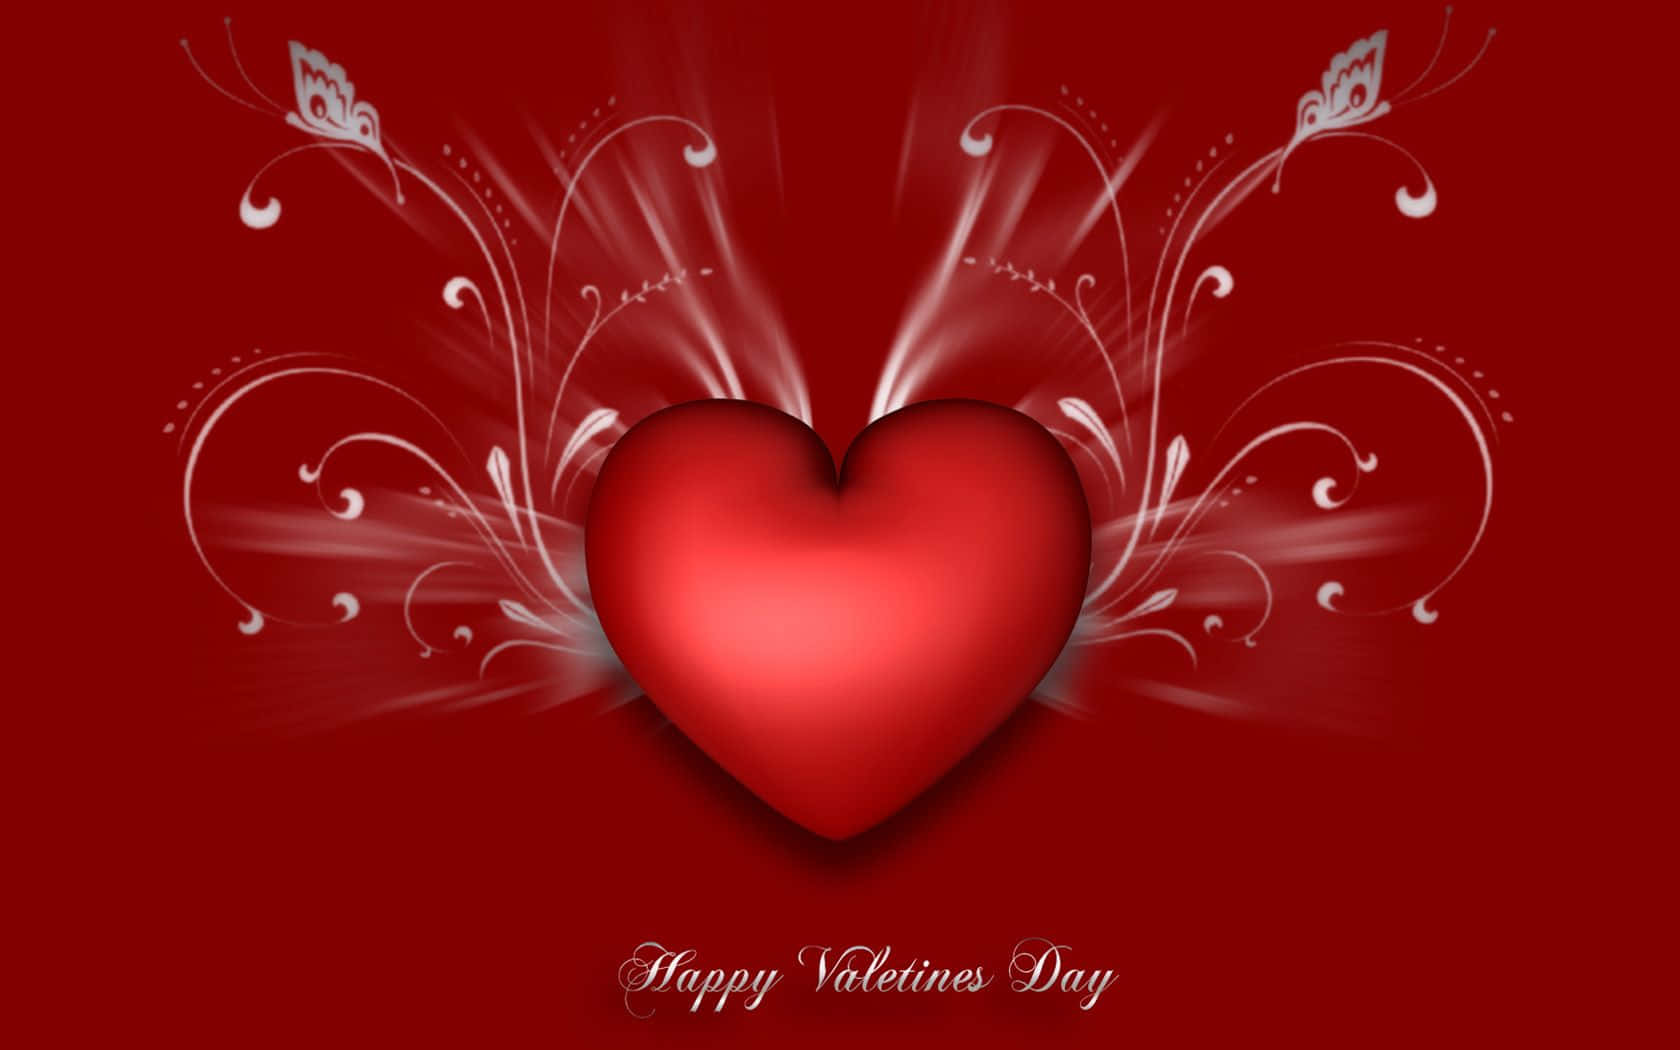 Valentine's Day Wallpapers - Valentine's Day Wallpapers